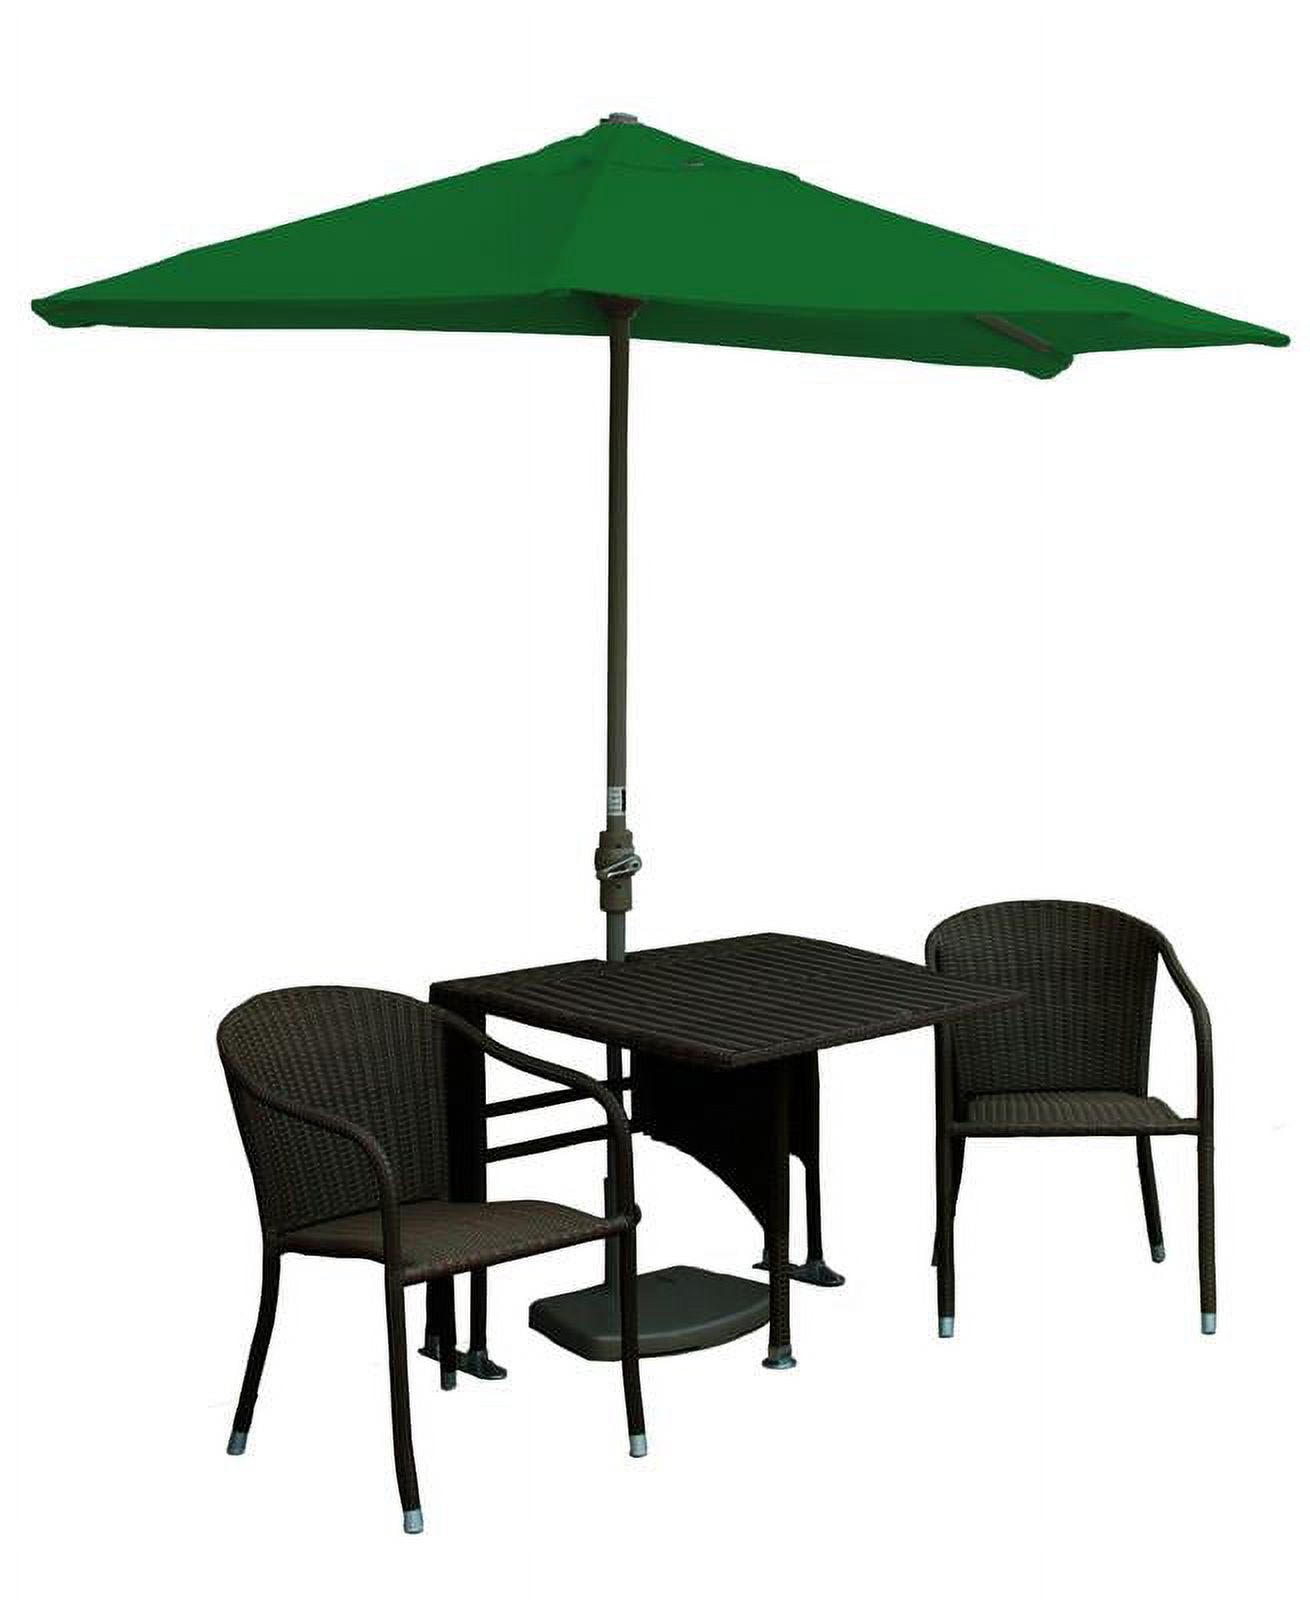 Blue Star Group Terrace Mates Daniella All-Weather Wicker Java Color Table Set w/ 9'-Wide OFF-THE-WALL BRELLA - Green Olefin Canopy - image 1 of 9